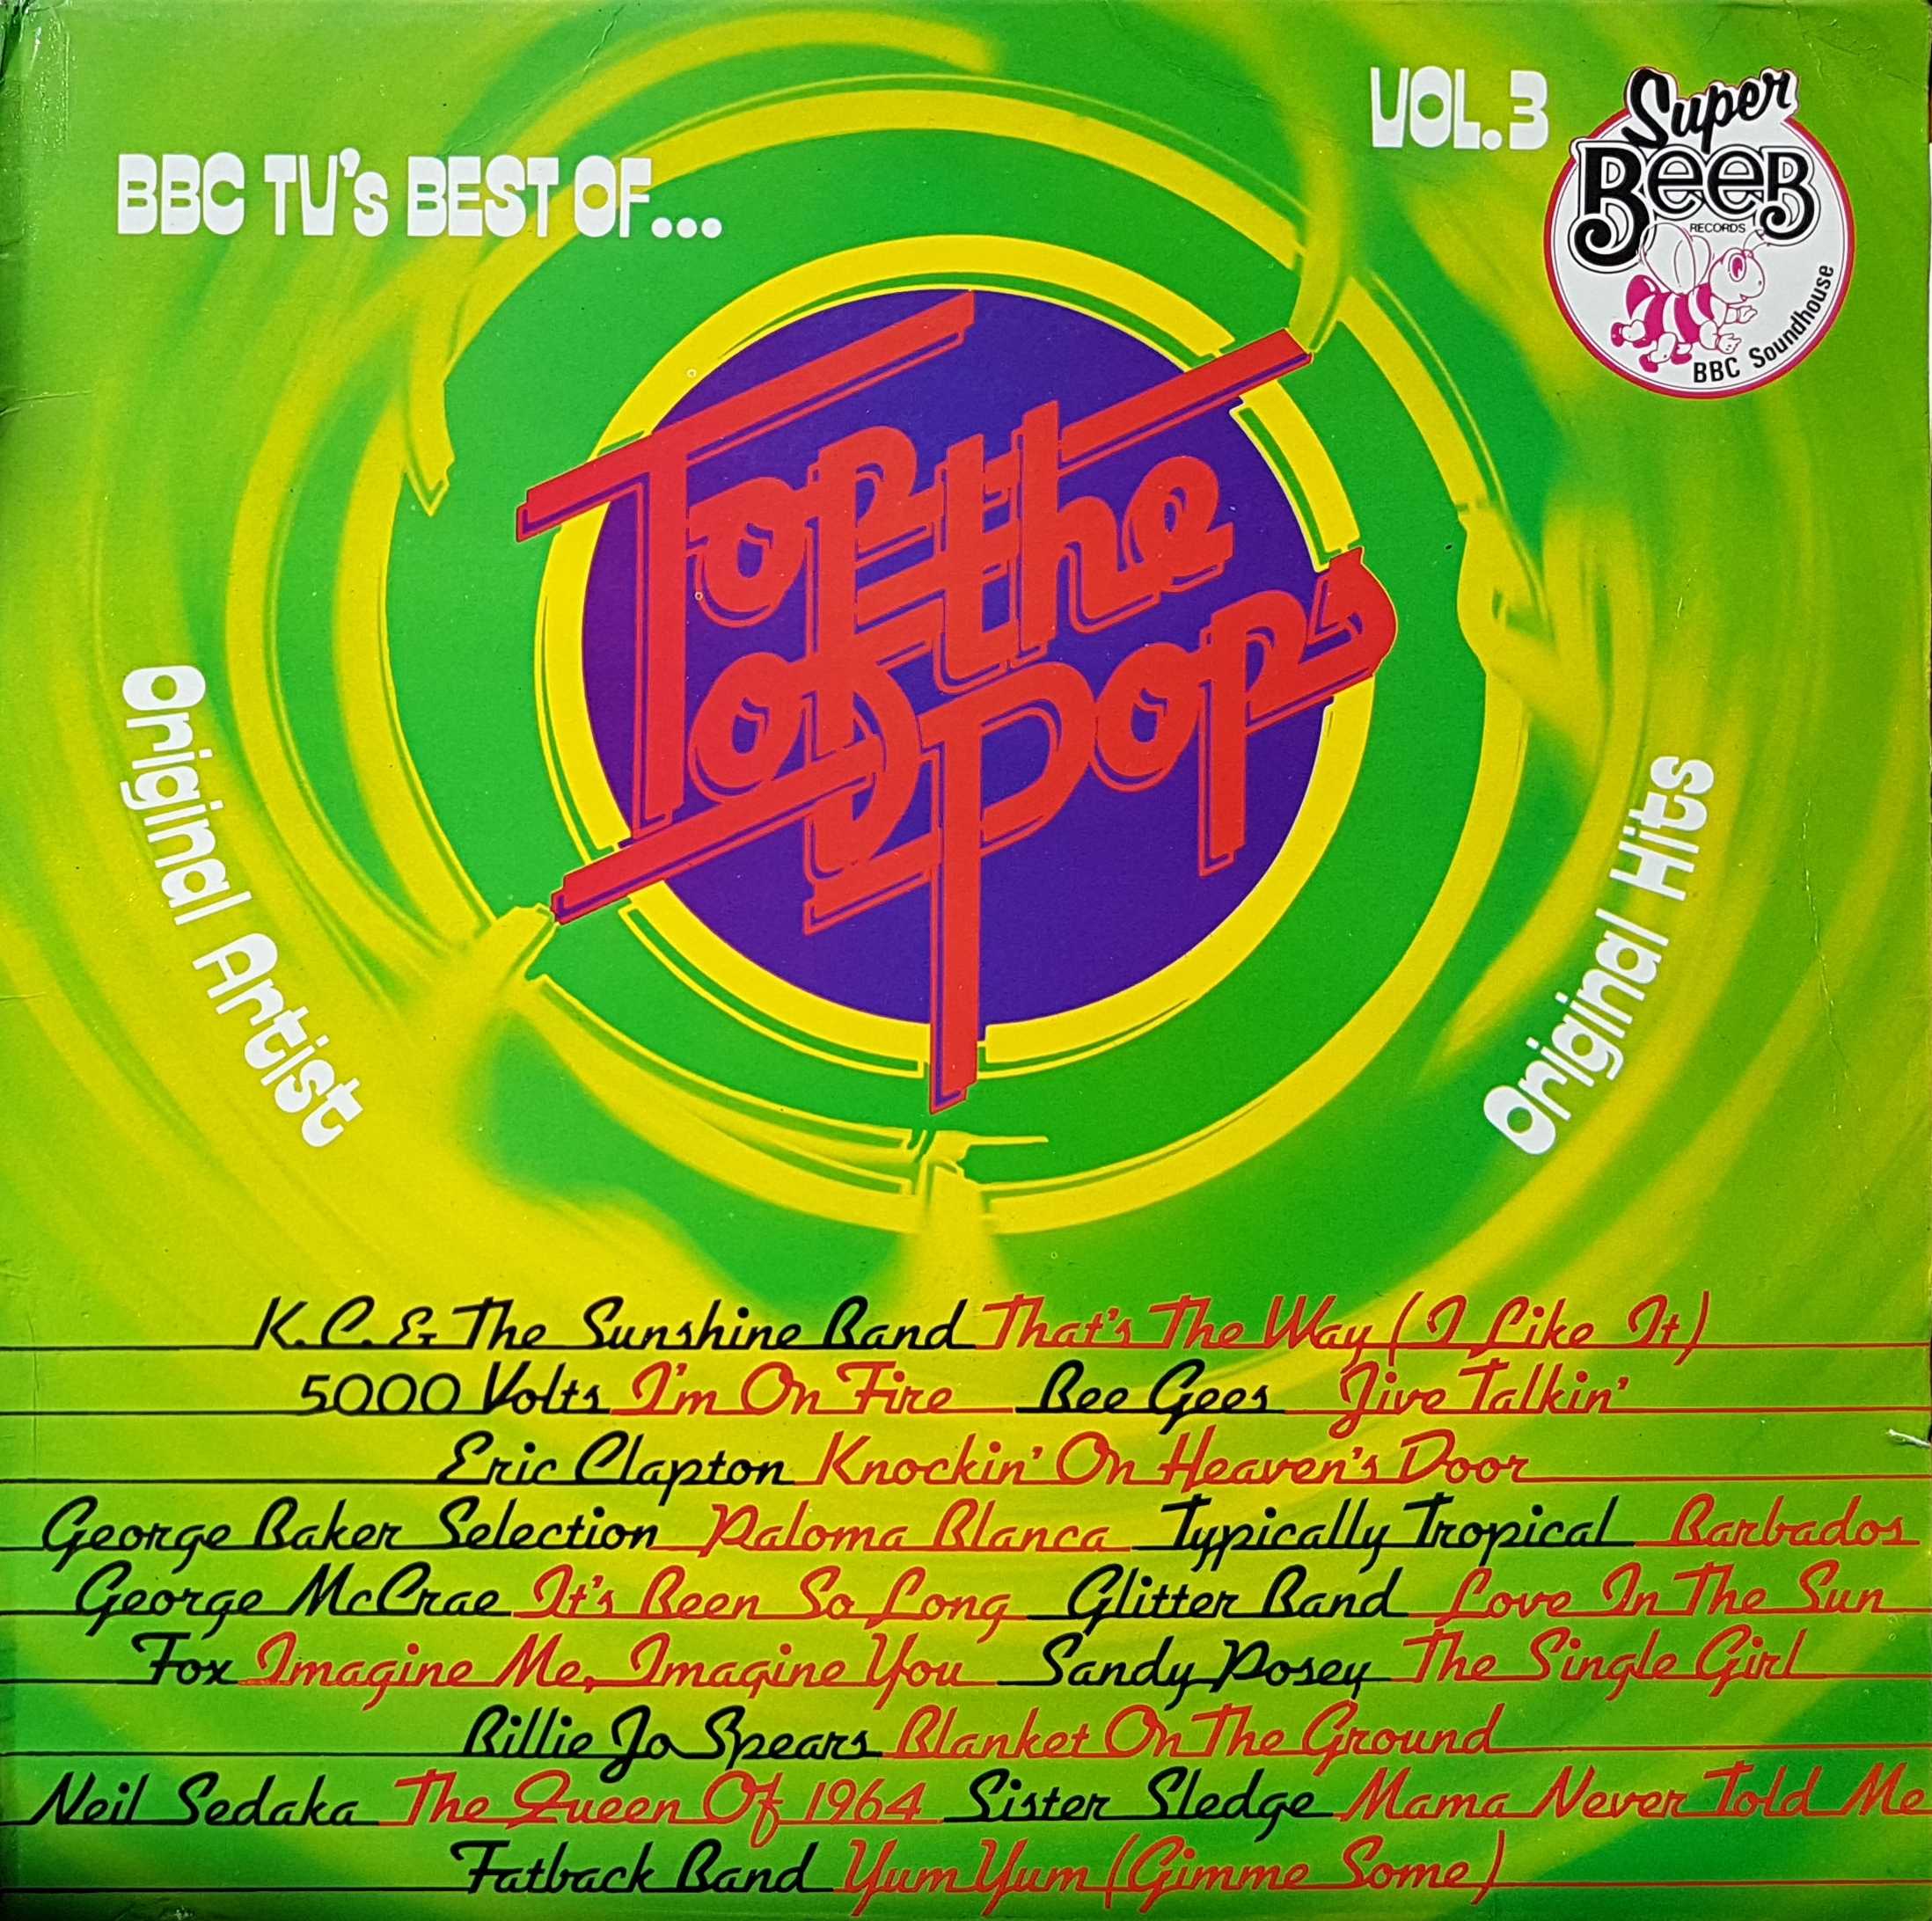 Picture of BELP 005 BBC TV's best of top of the pops - Volume 3 by artist Various from the BBC albums - Records and Tapes library